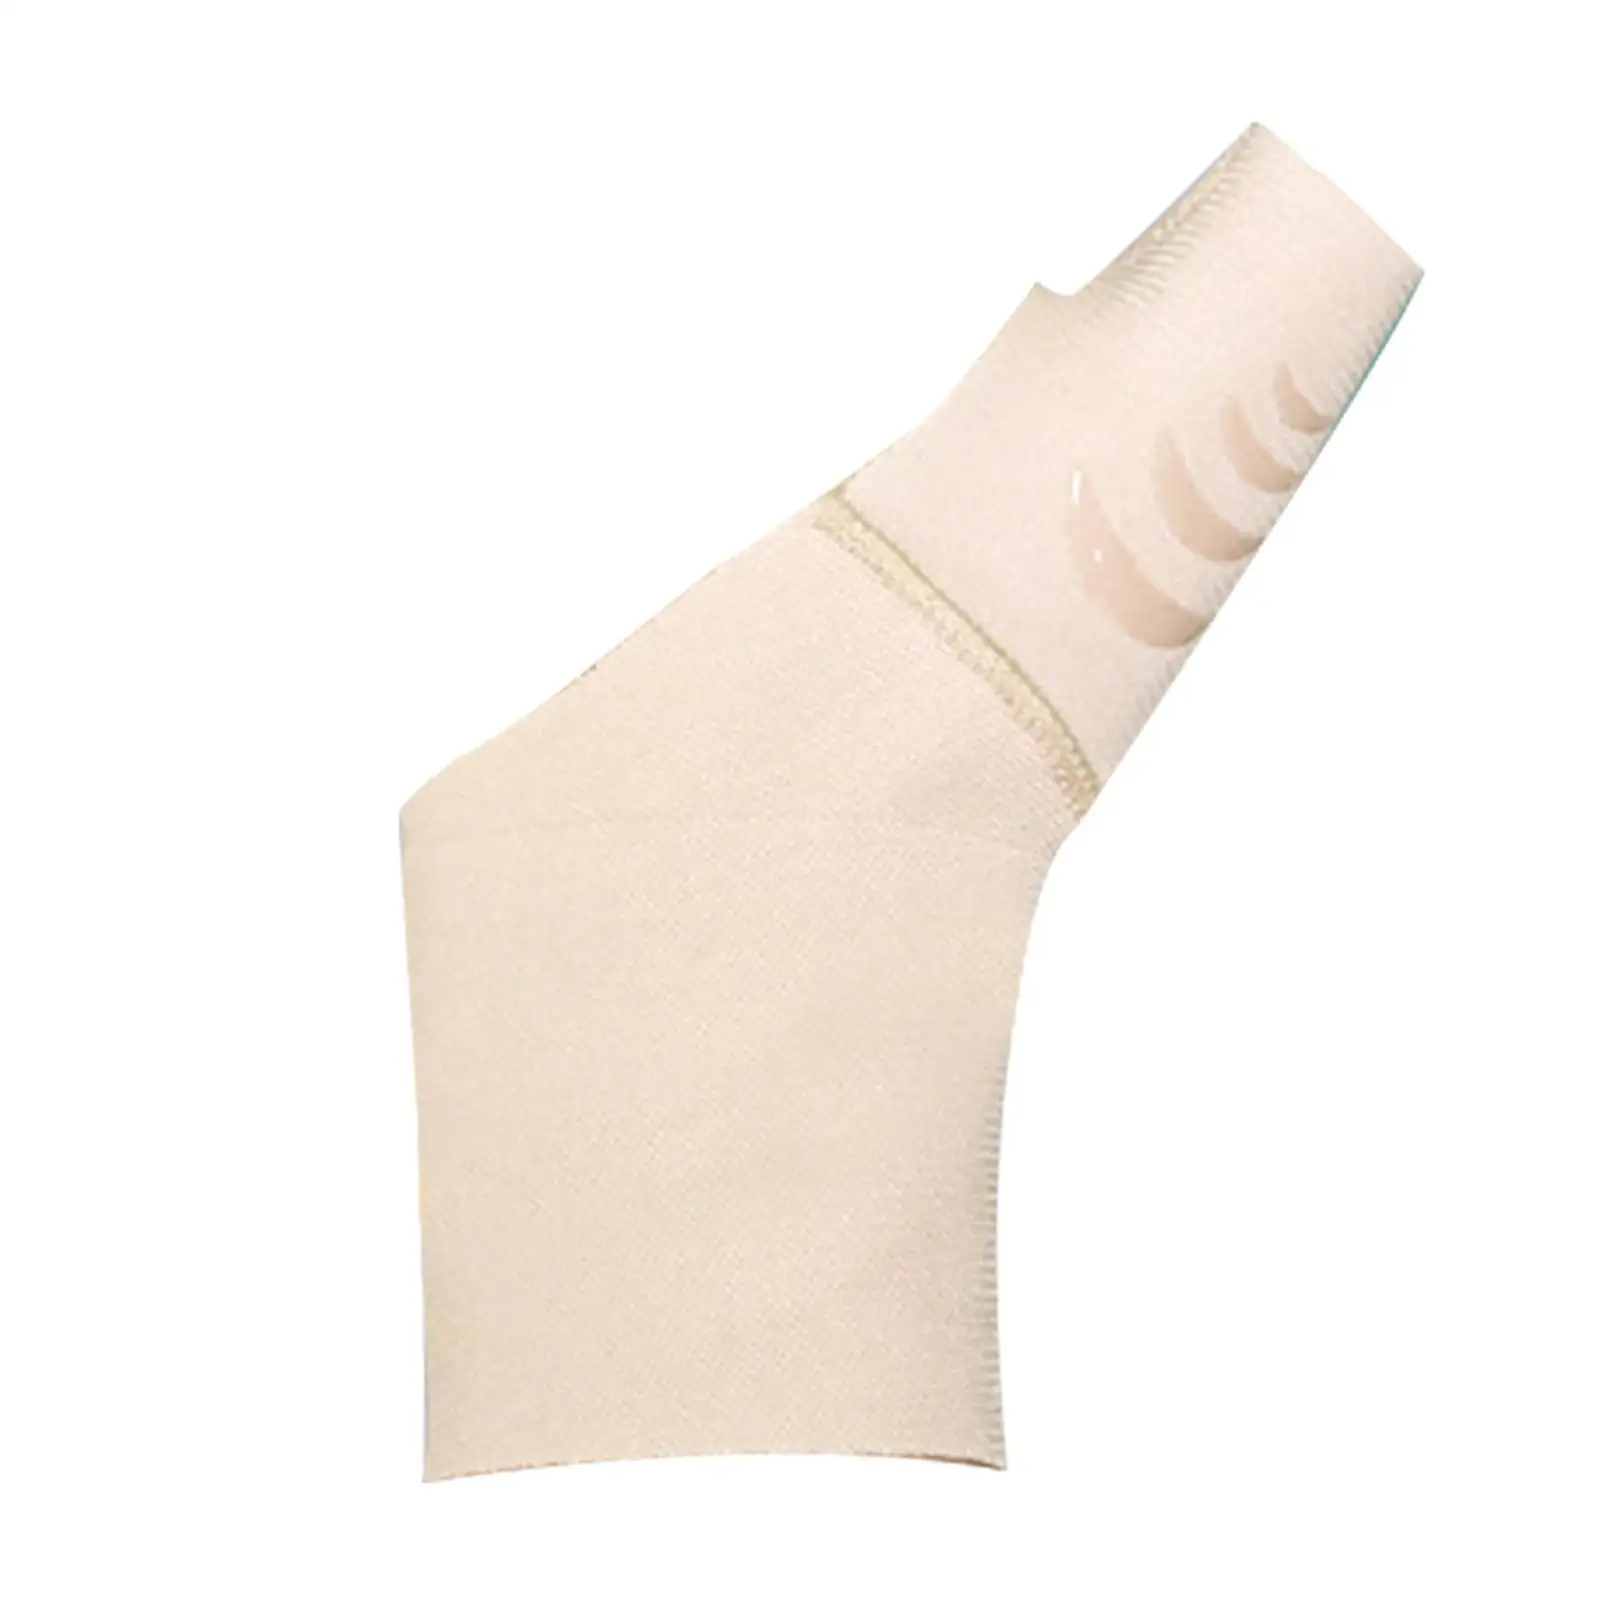 Single Thumb sleeve Soft Silicone Protector Removable Elastic Thumb Cover Support Brace Stabiliser for Basketball Carpal